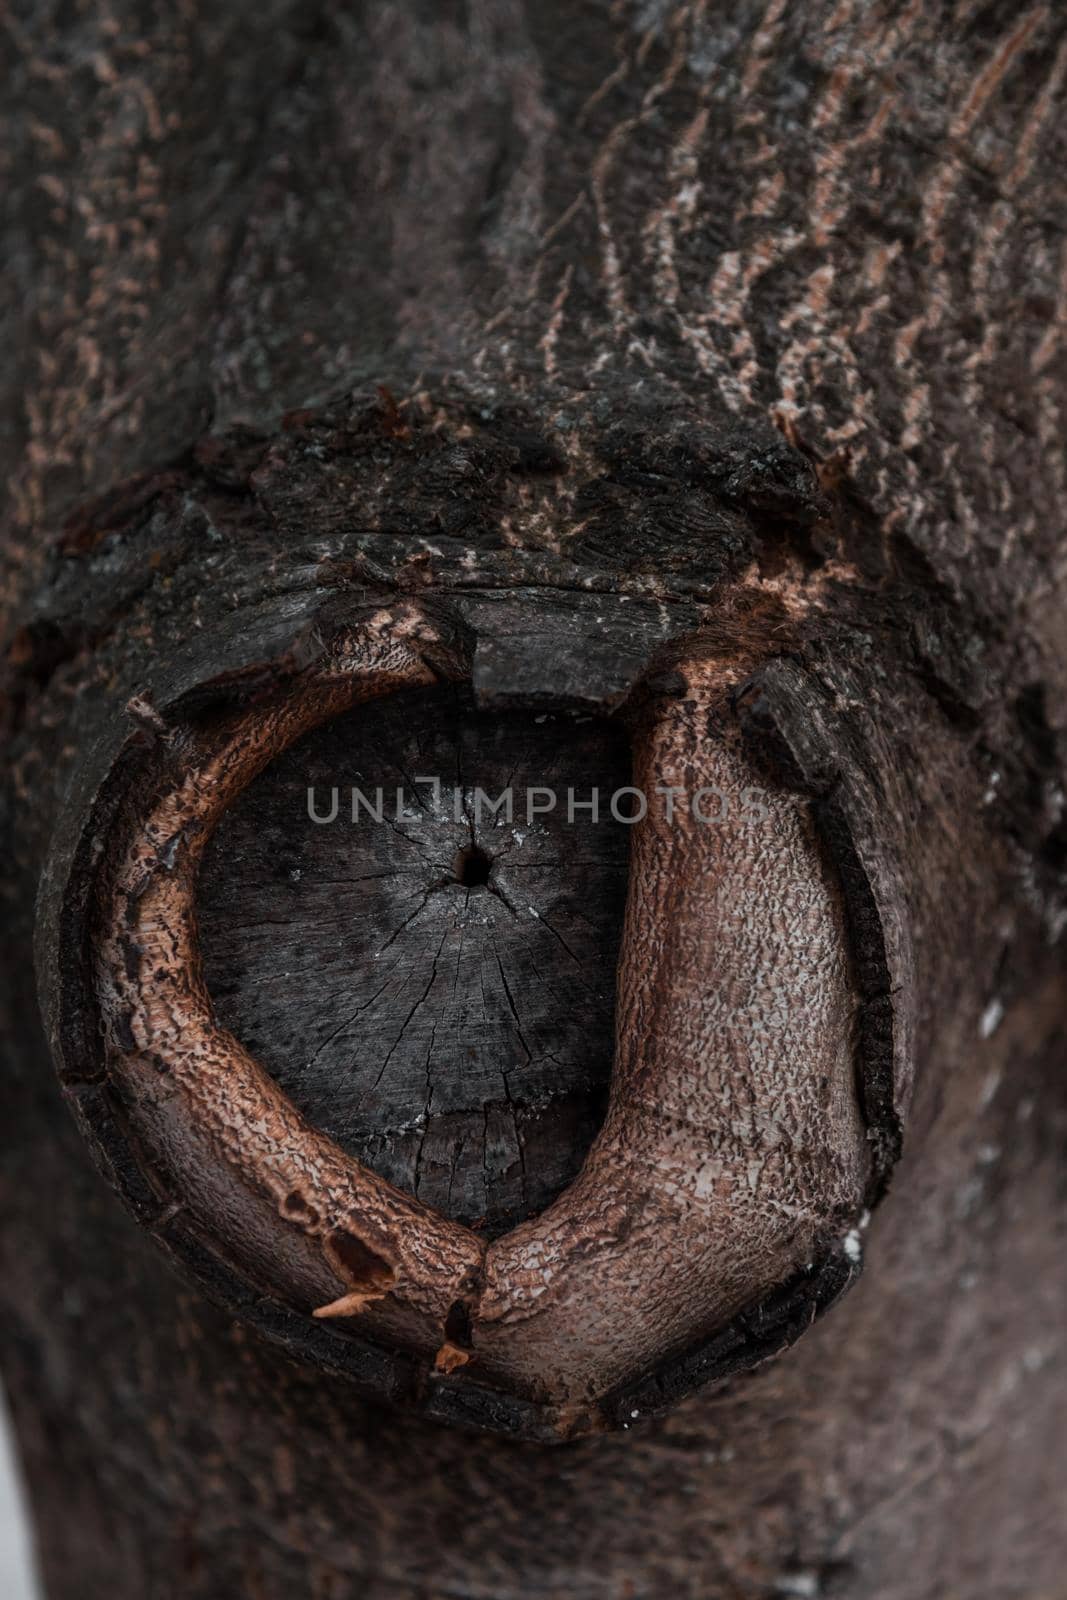 Texture of tree bark with a circular knot. Texture of the bark of a tree with a circular knot hole.